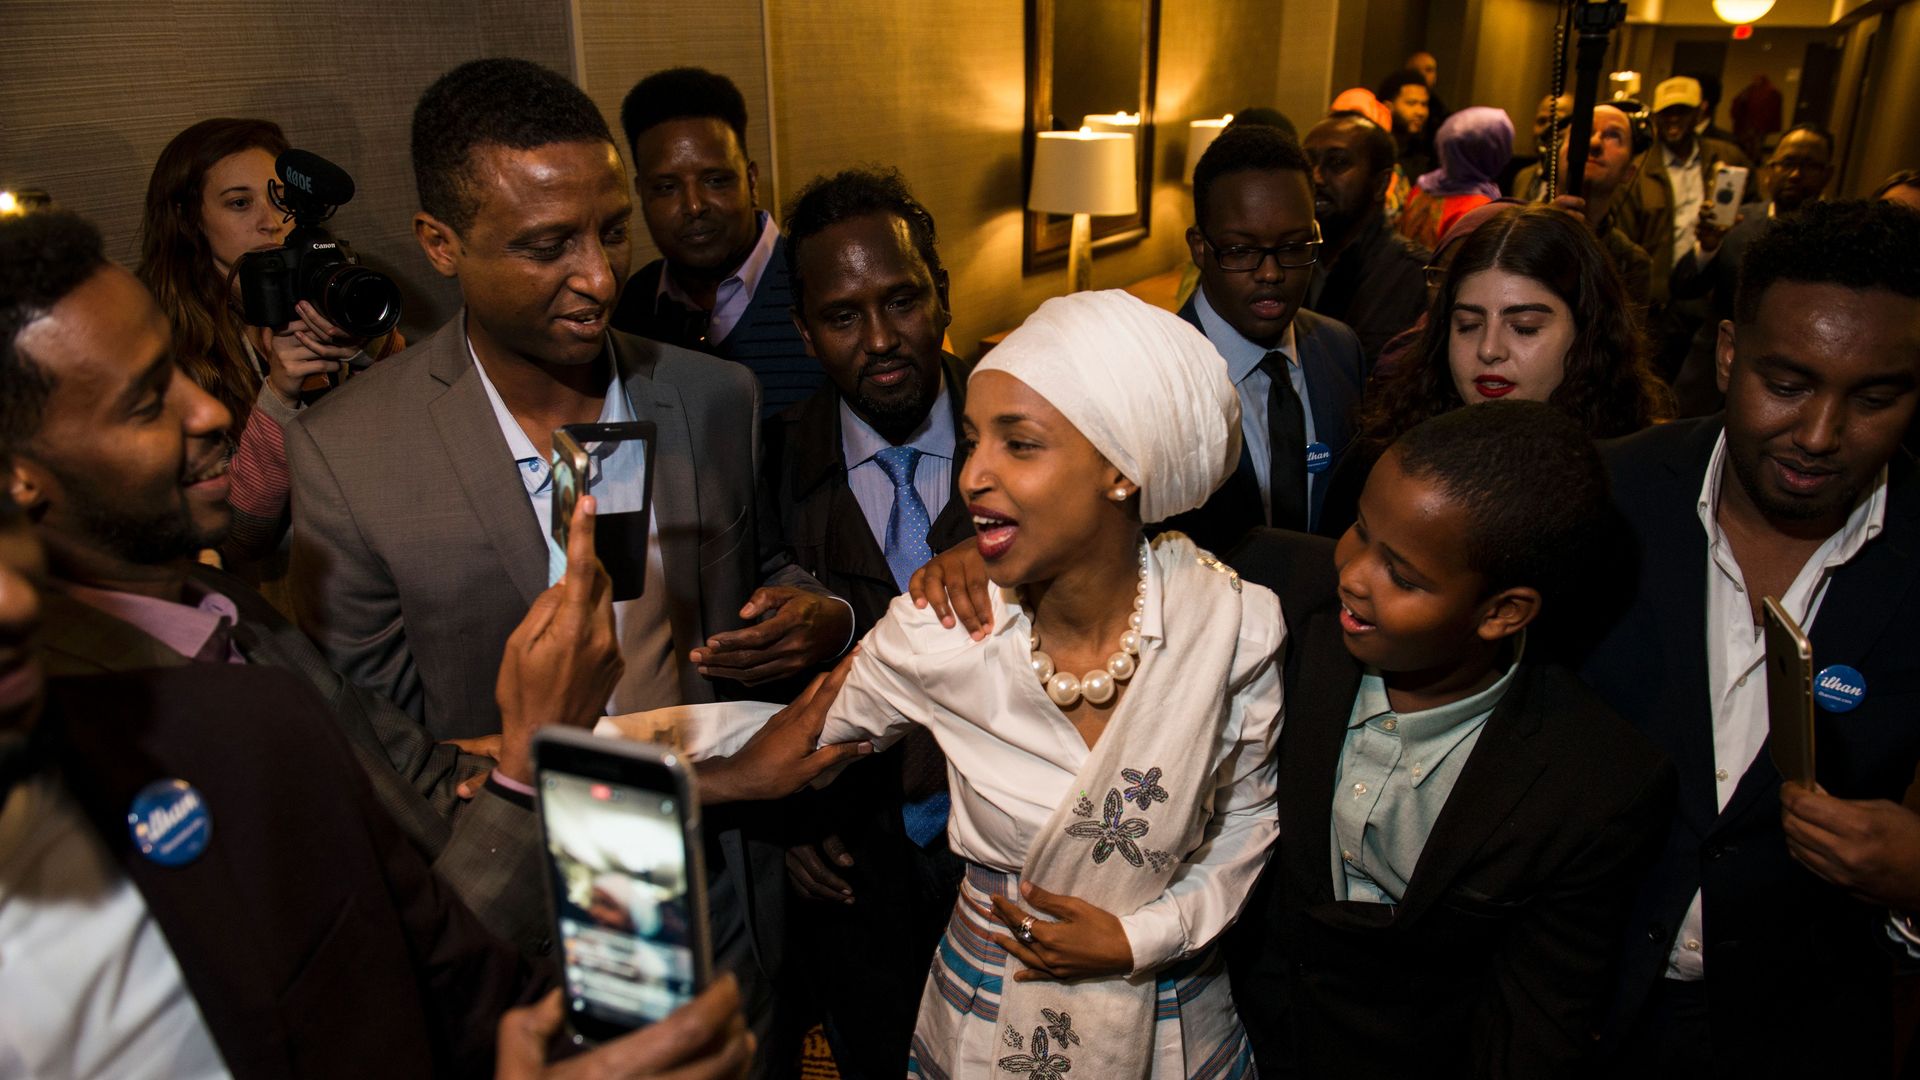 Ilhan Omar, at a campaign event in November 2016 in Minneapolis, Minnesota. Photo: Stephen Maturen/AFP/Getty Images